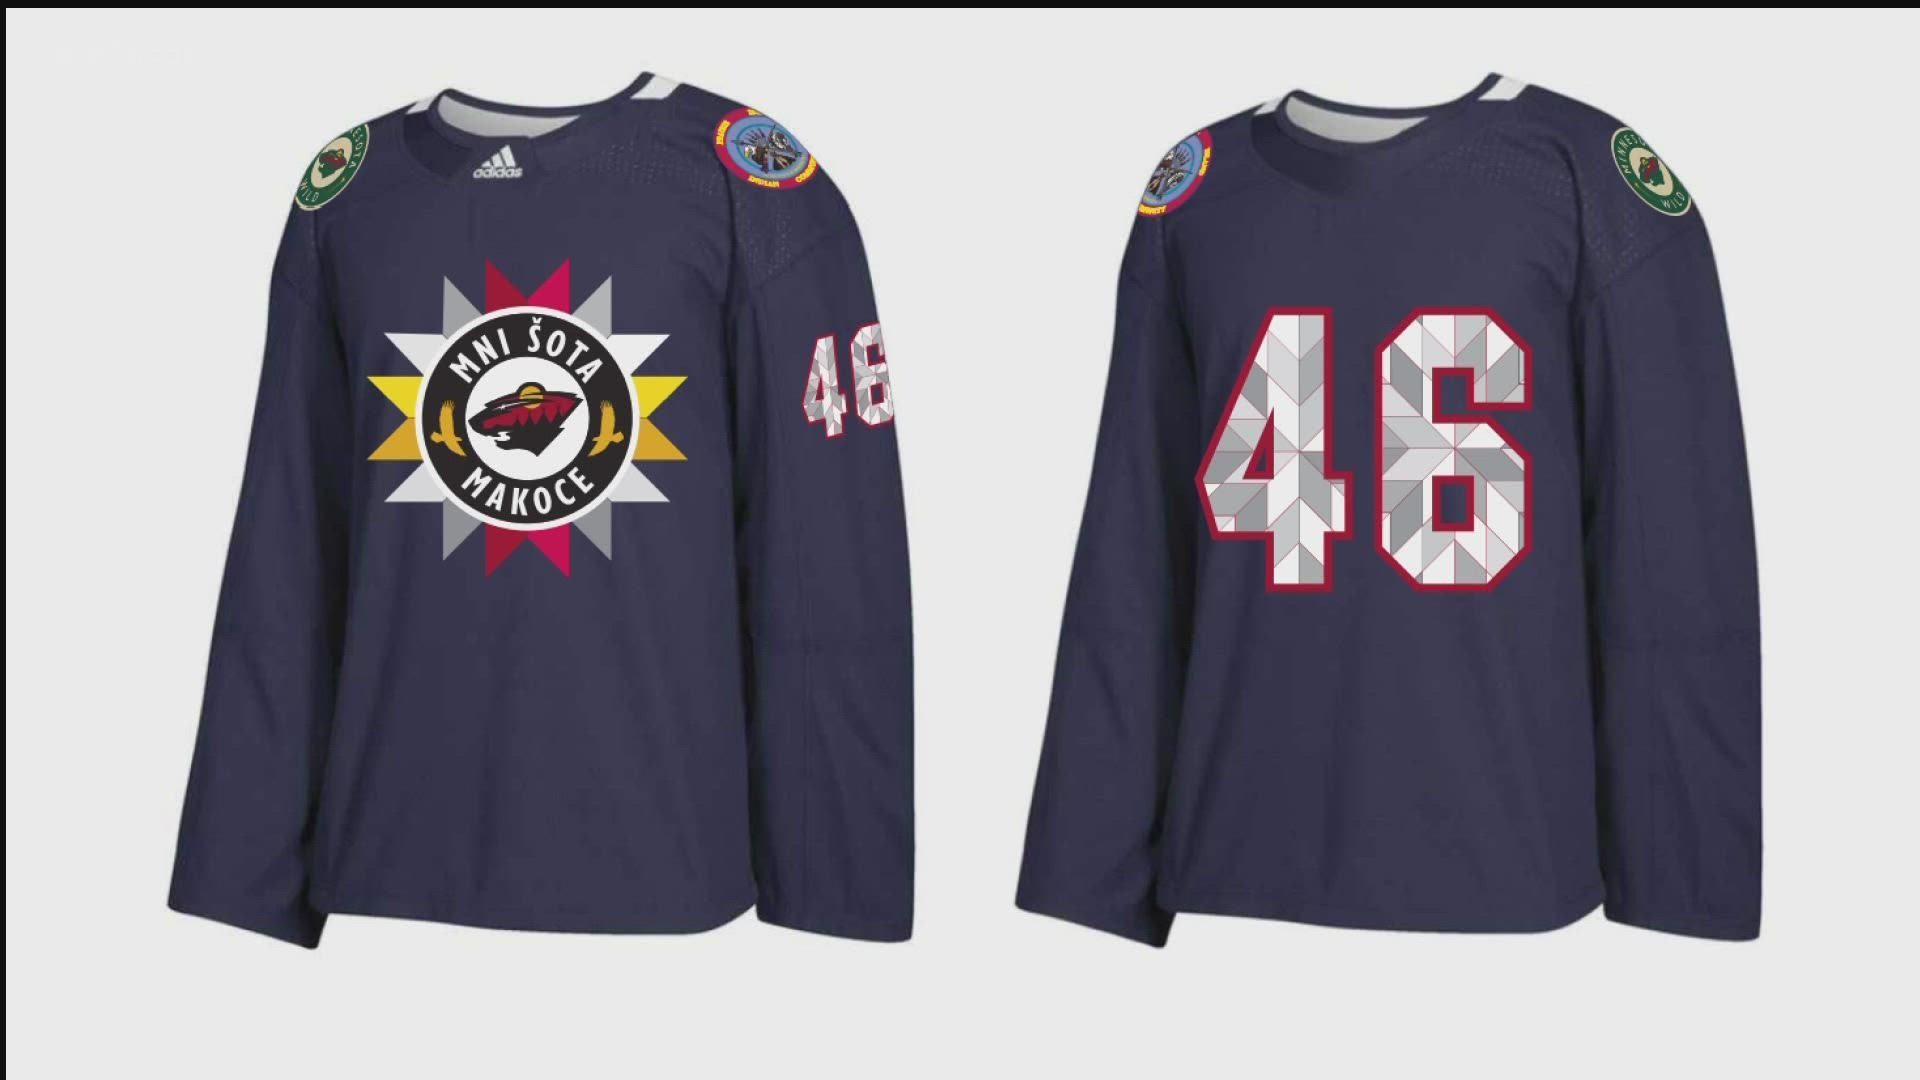 The partnership will honor Native American Heritage on Nov. 26, when the Wild hosts the Winnipeg Jets.